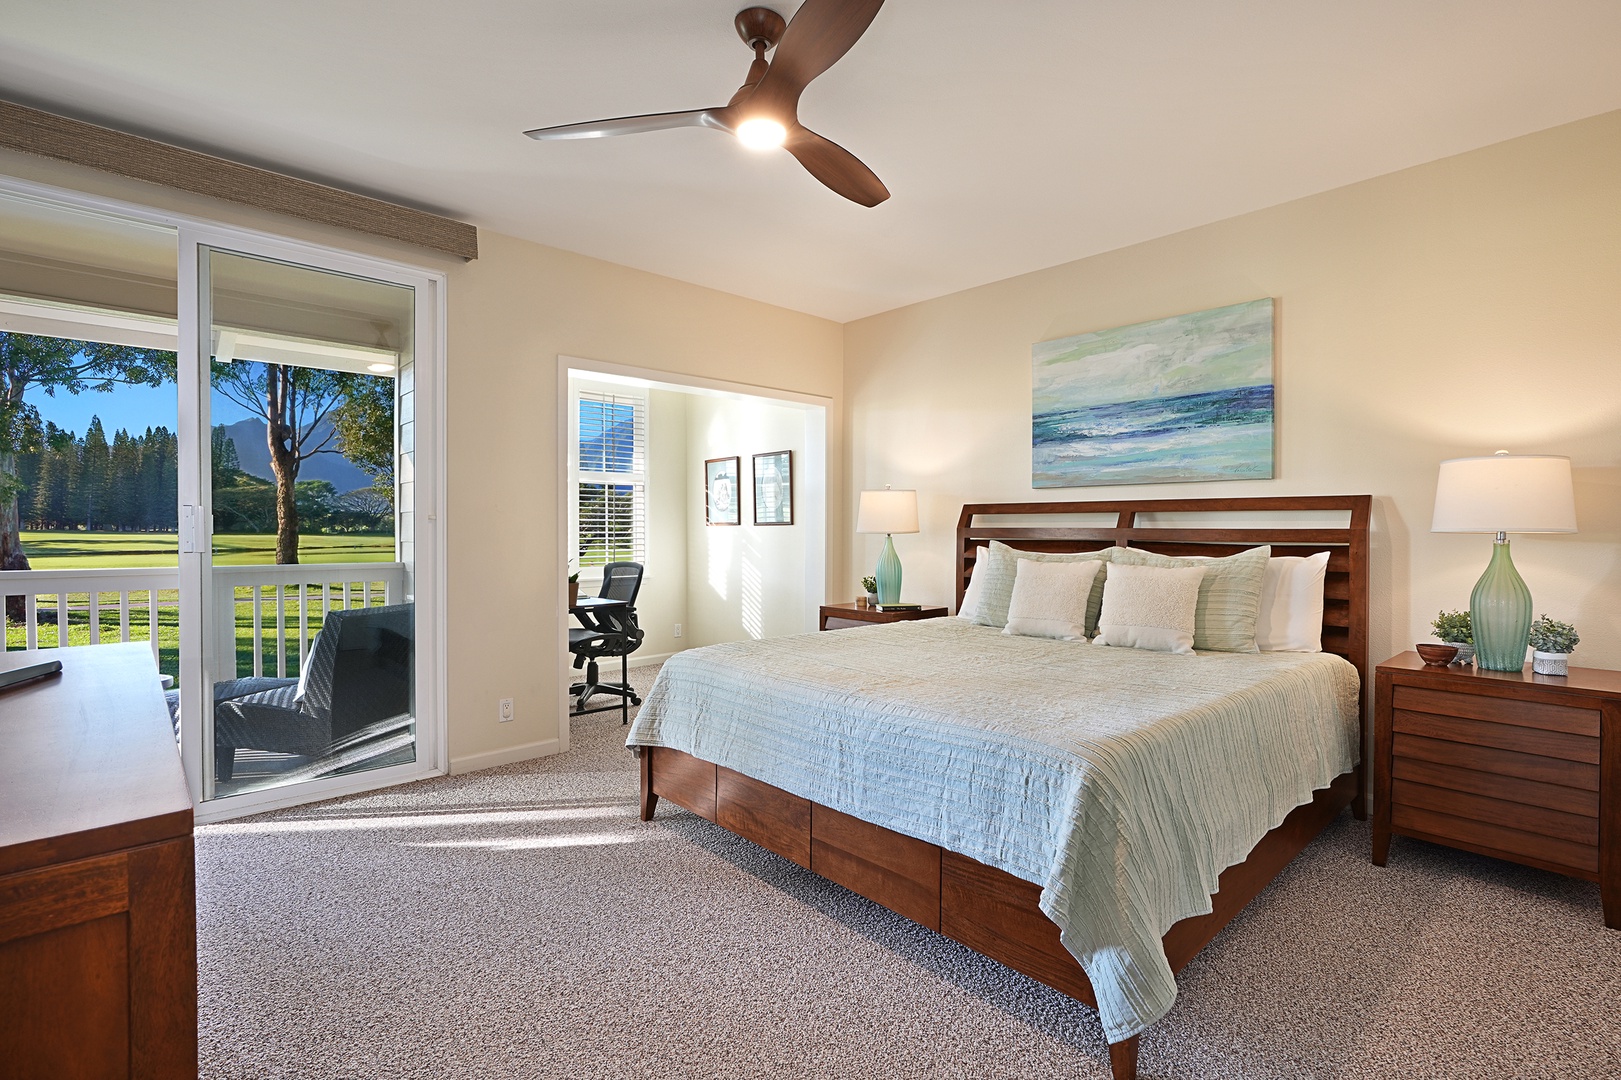 Princeville Vacation Rentals, Casa Makara - The primary bedroom suite is complete with a dedicated home office, private lanai and TV.